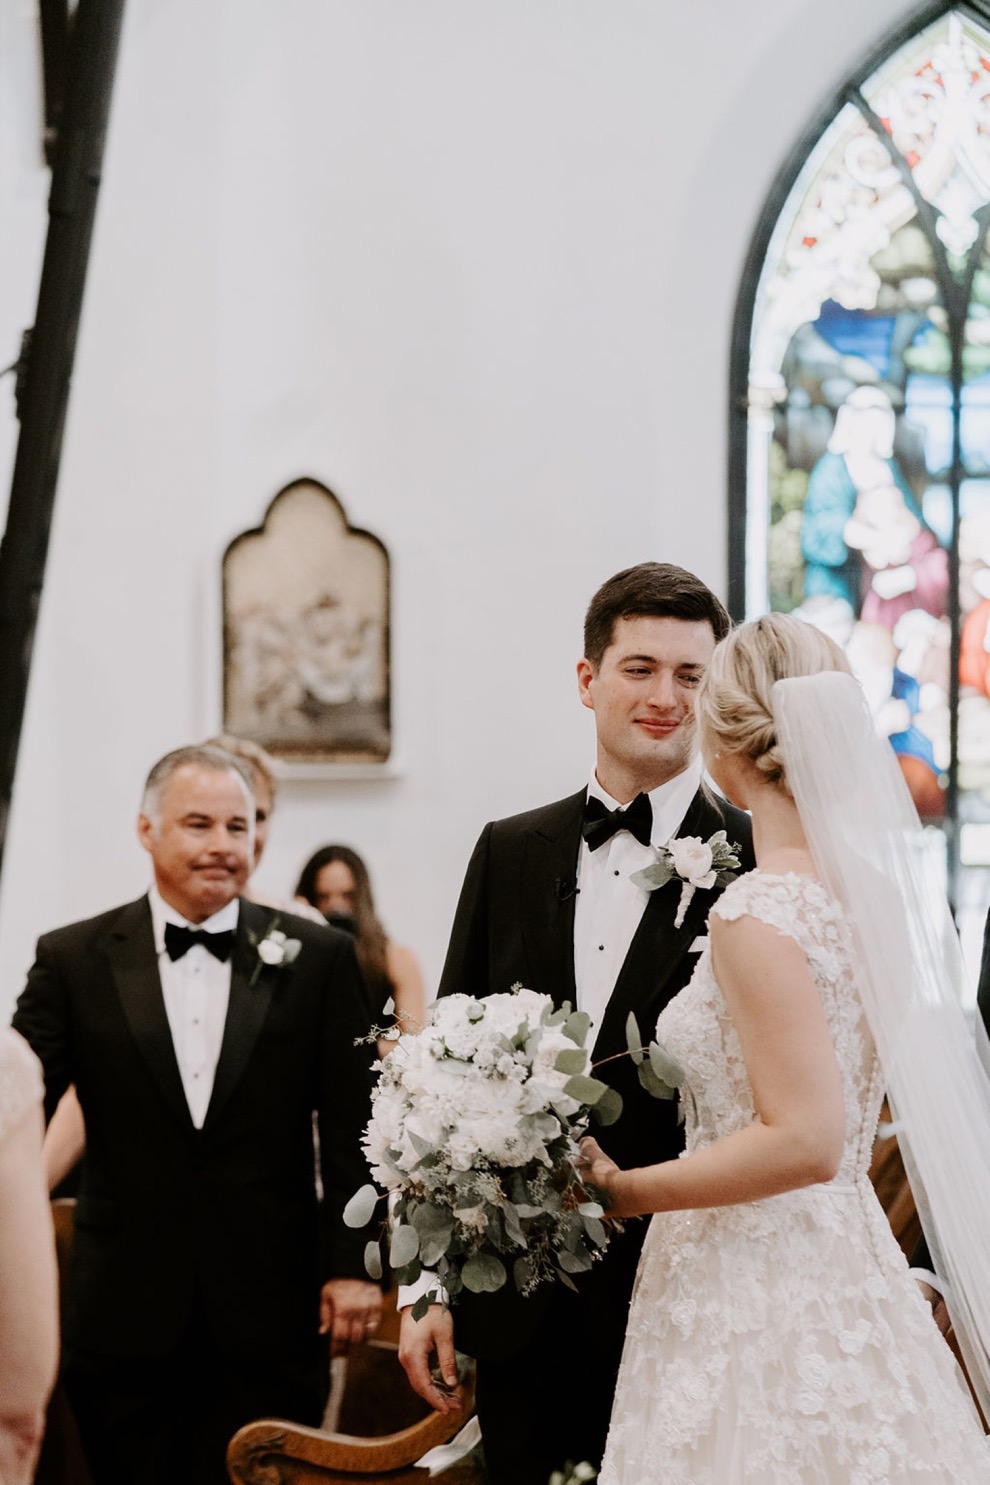 bride and groom at altar during church wedding ceremony